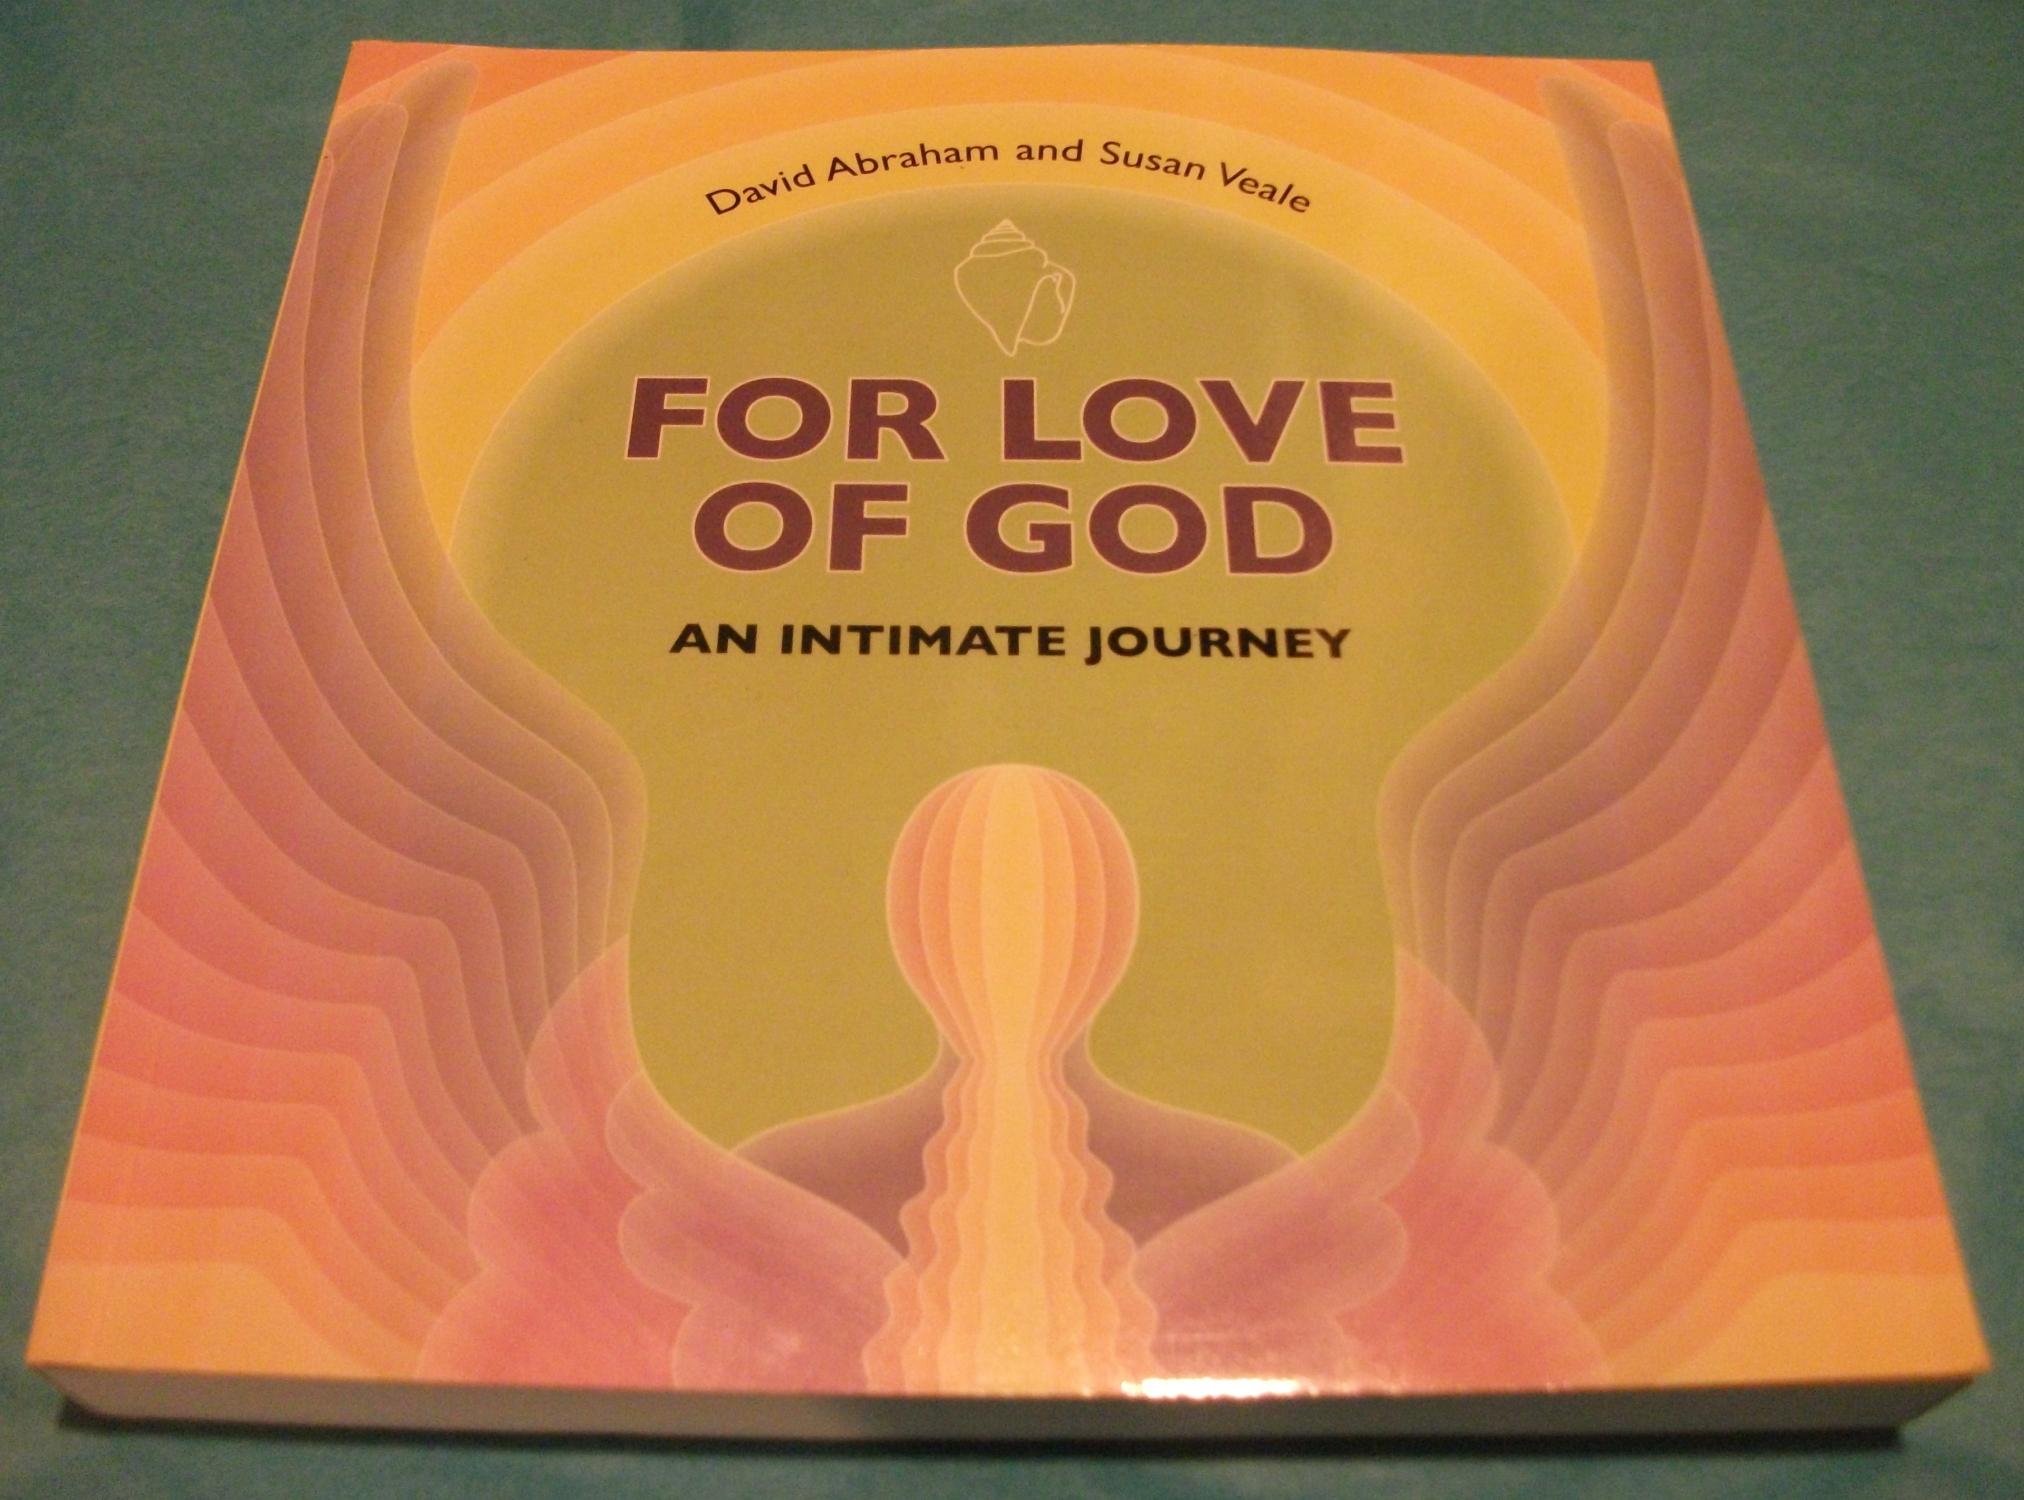 For Love of God: An Intimate Journey by David Abraham and Susan Veale